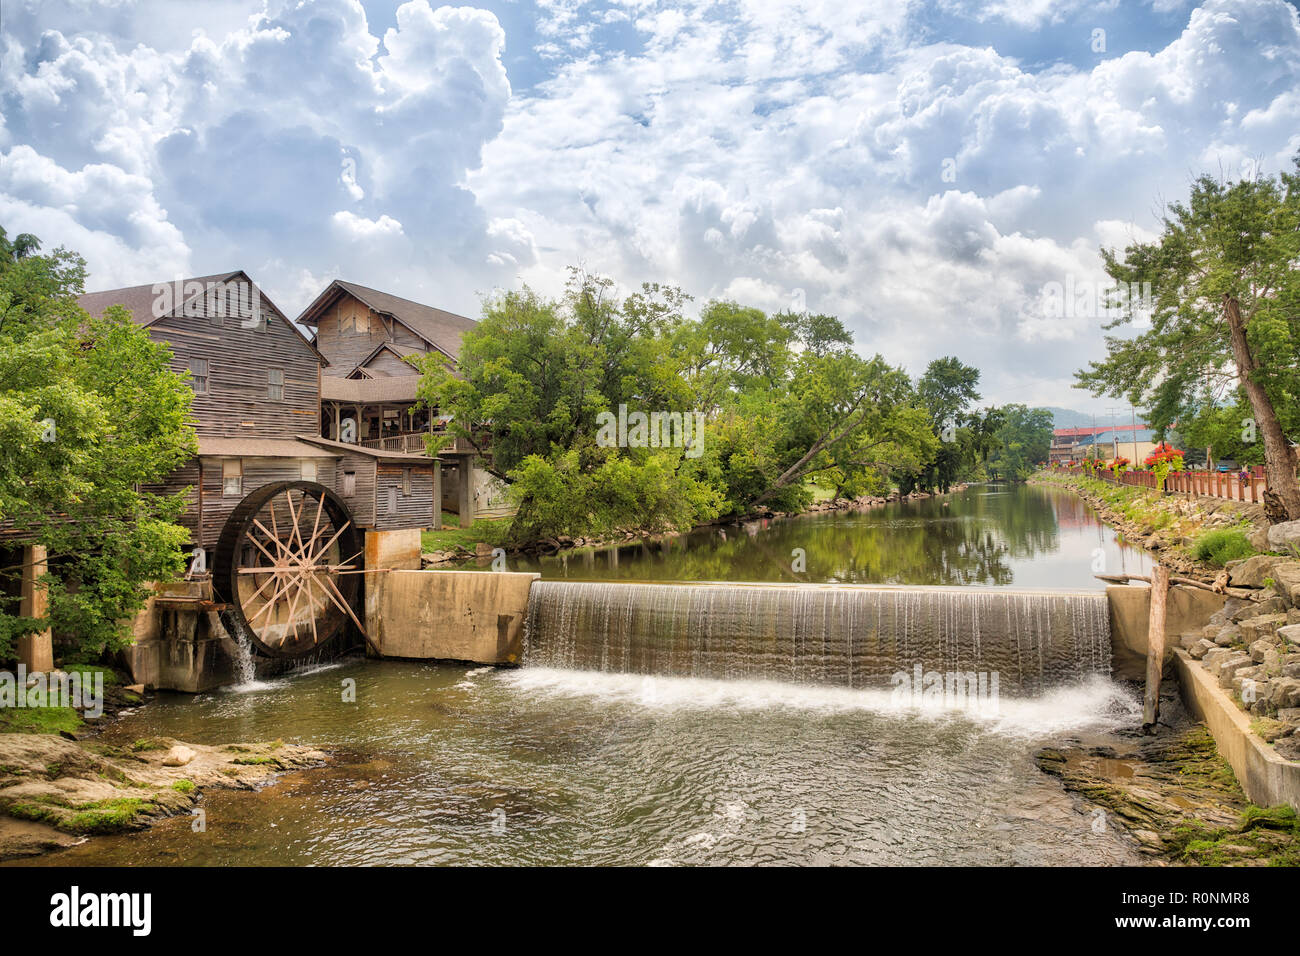 Landscape photo of a river and old mill with blue sky with clouds and the trees reflecting in the water. Stock Photo